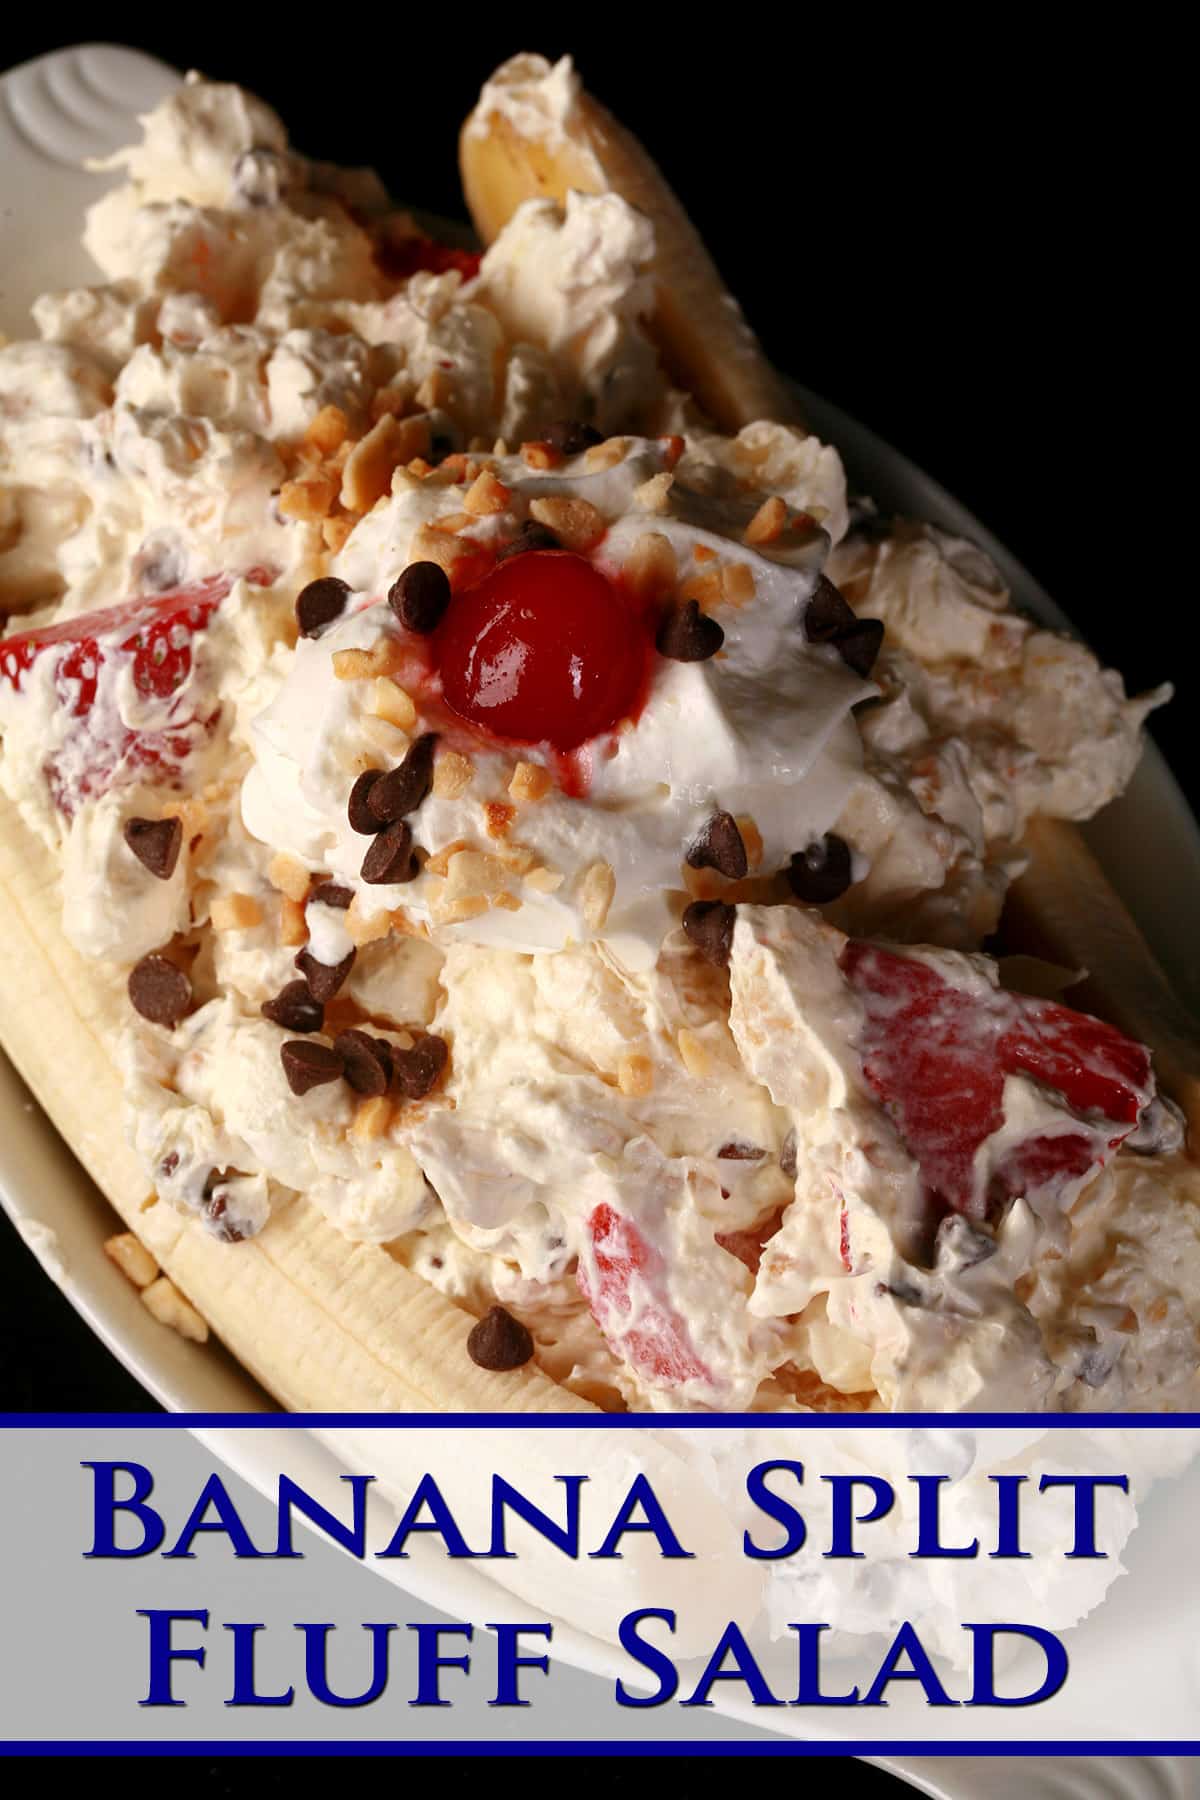 A large serving of banana split marshmallow salad, done up to look like a banana split.